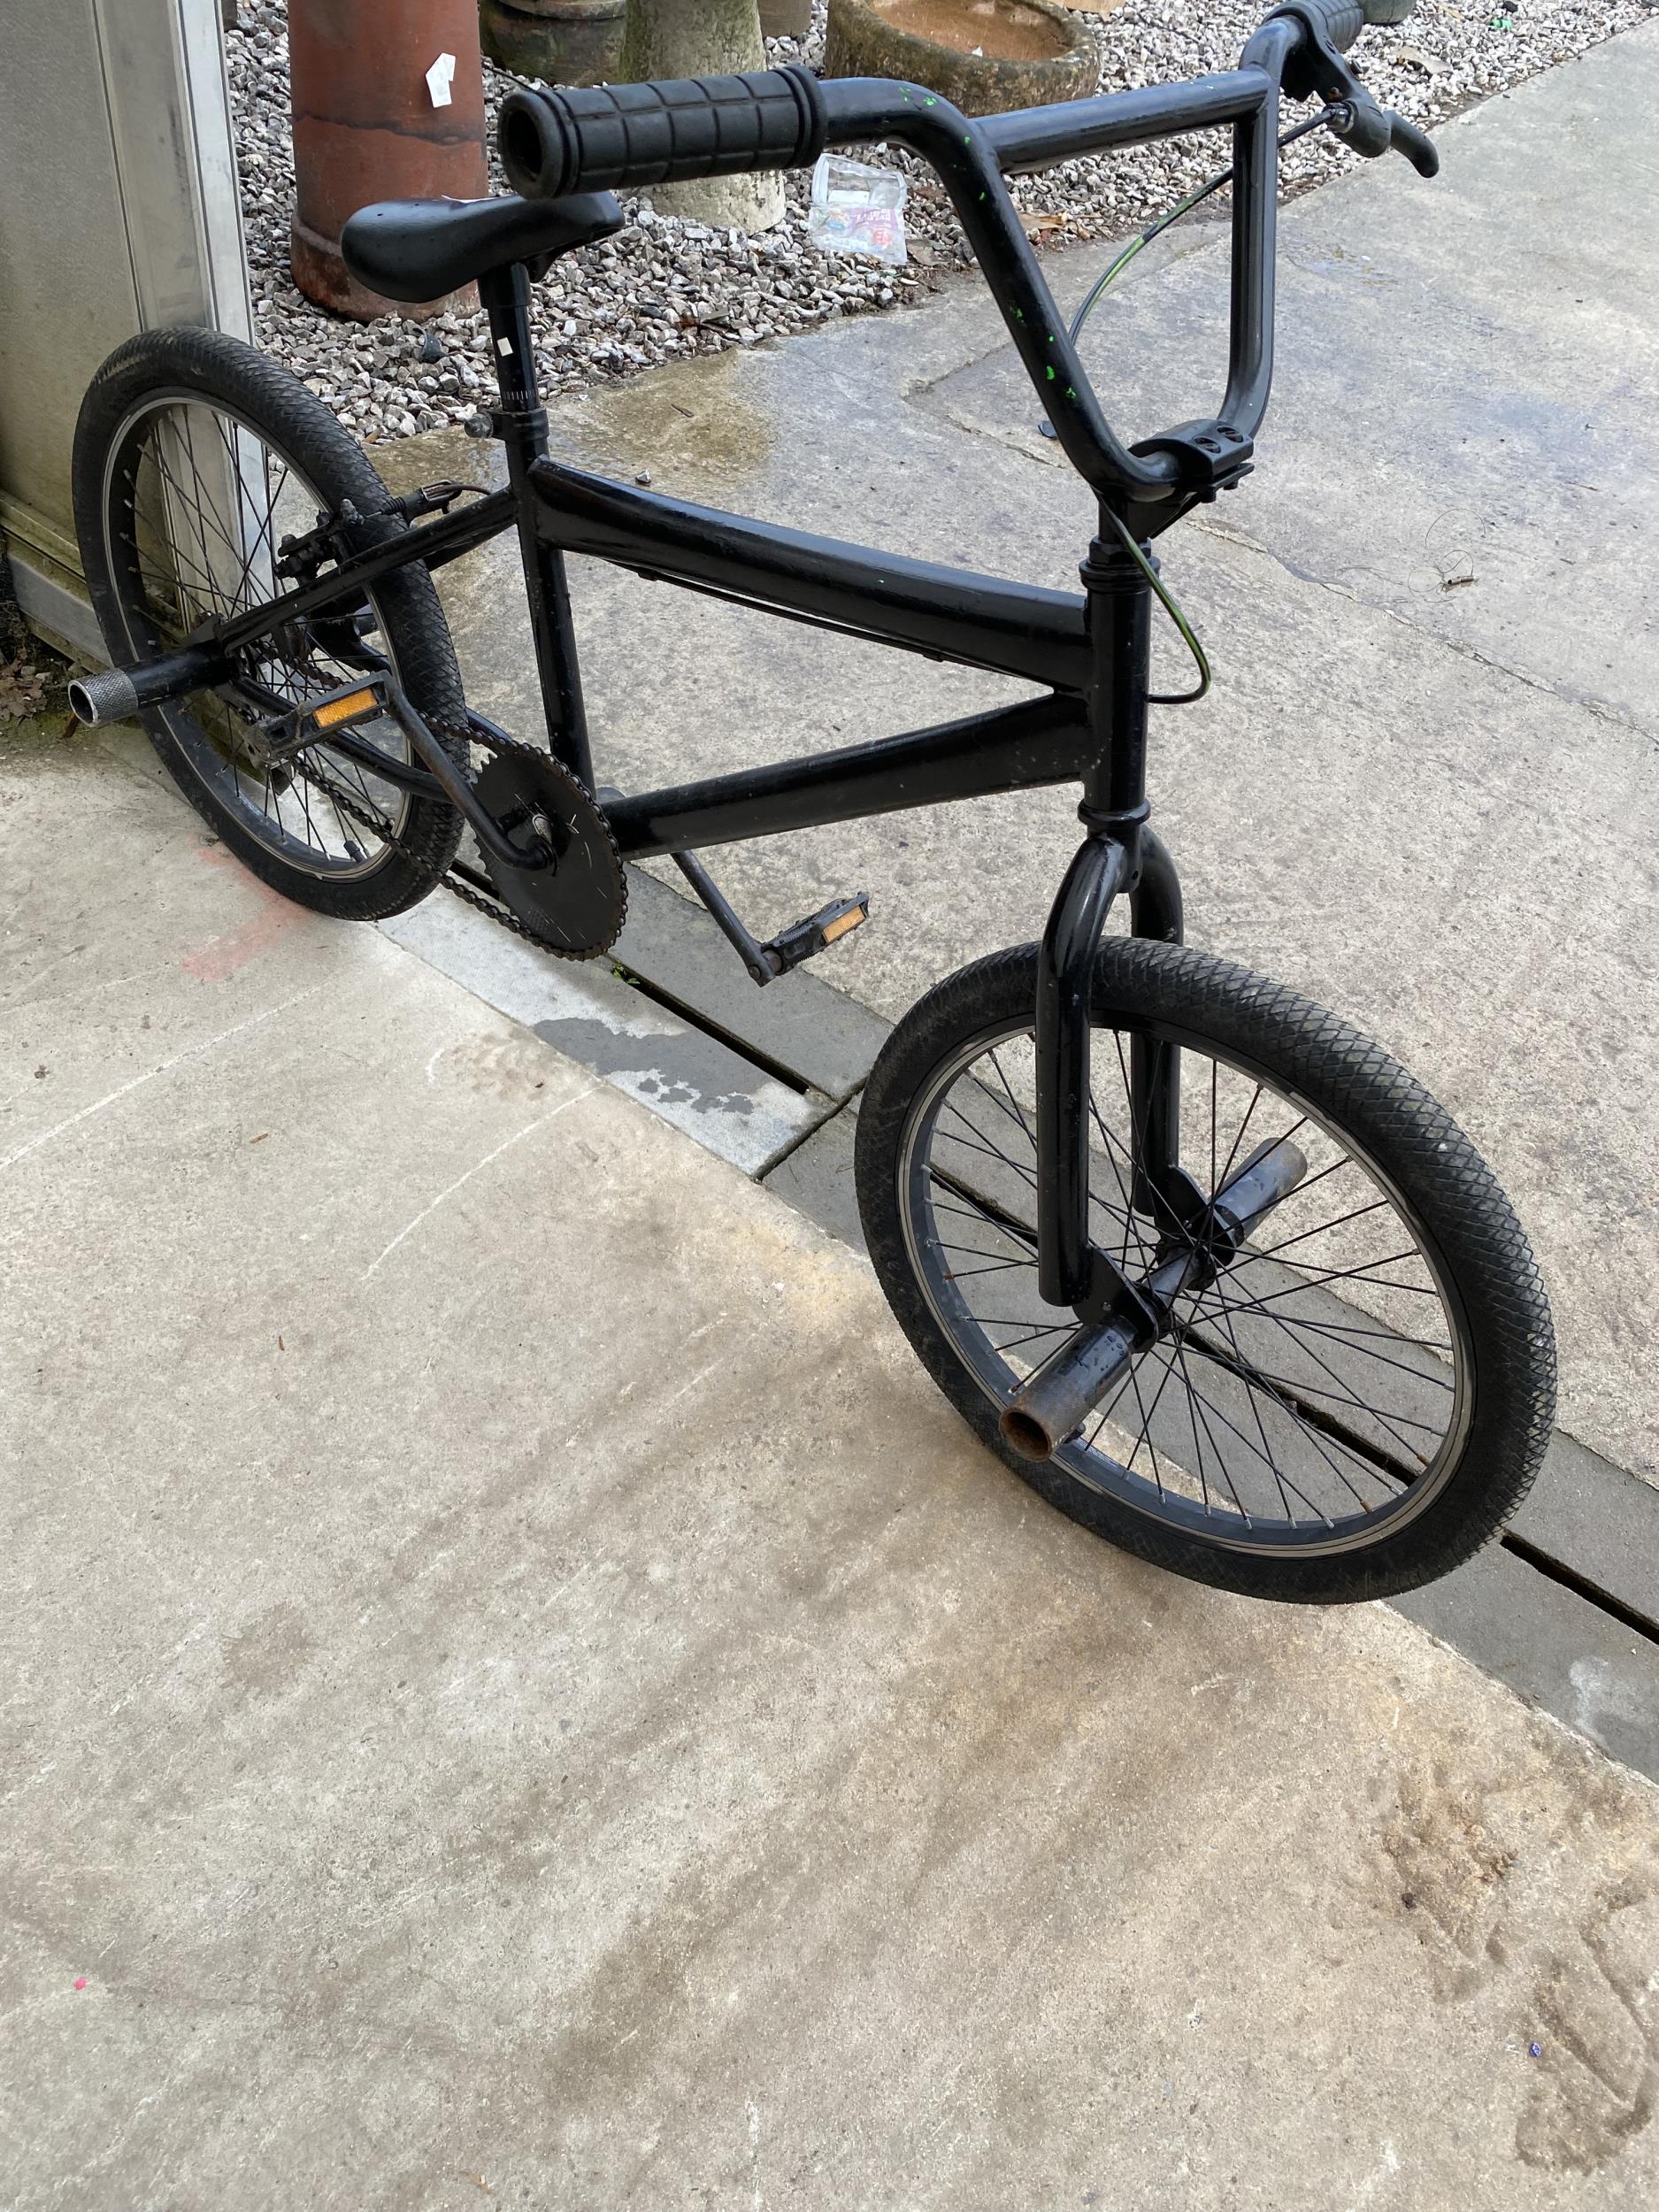 A CHILDS BMX BIKE WITH REAR STUNT PEGS - Image 3 of 3